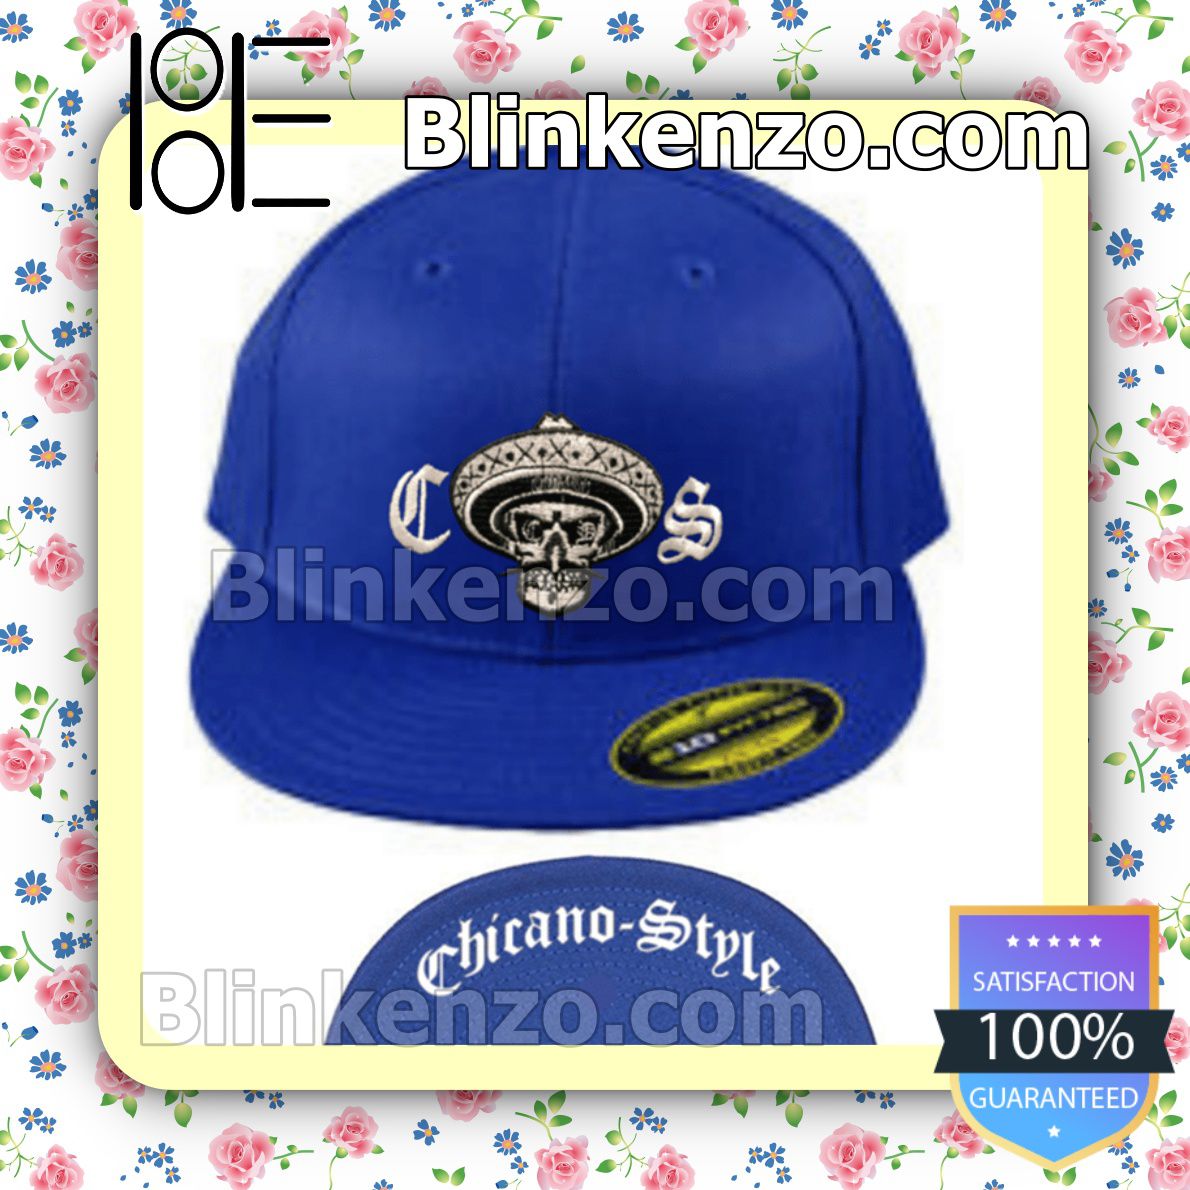 Review Chicano Style Blue Baseball Caps Gift For Boyfriend